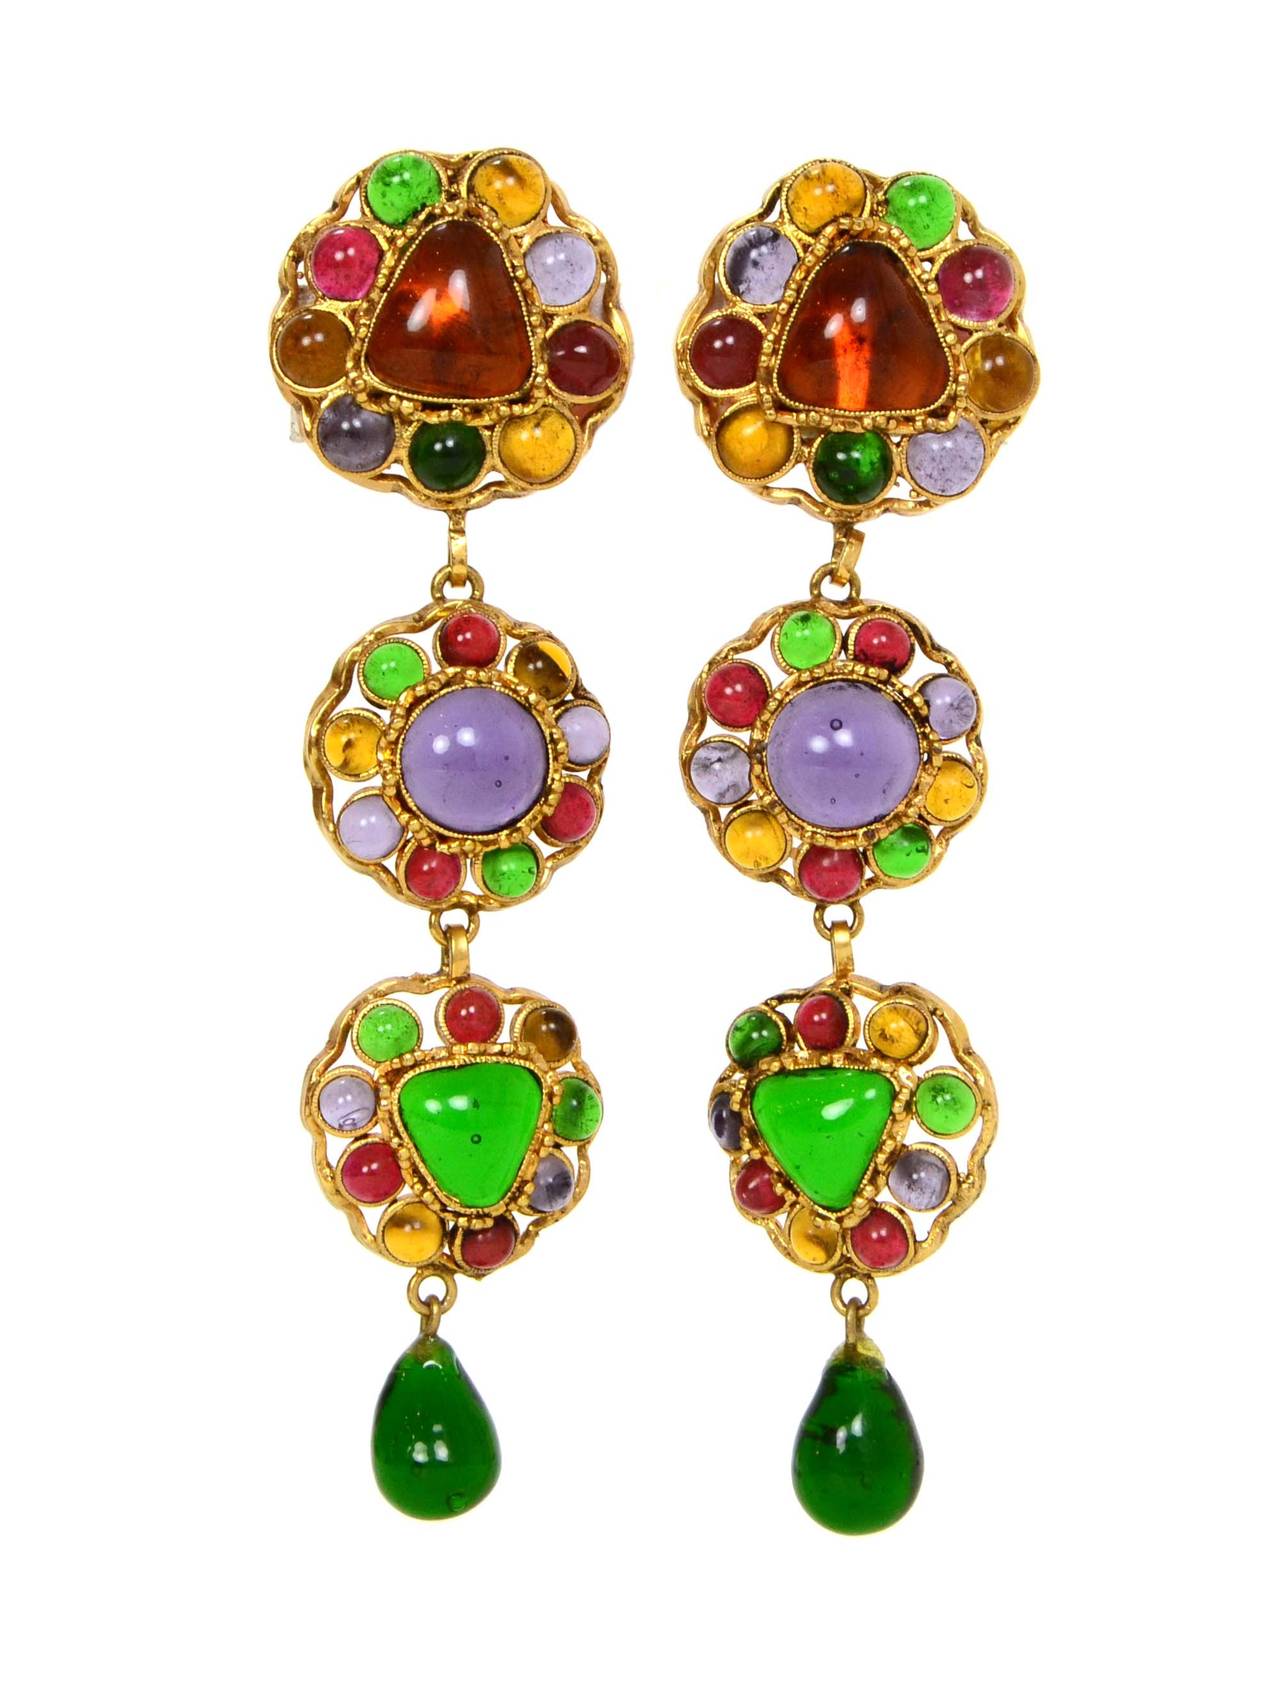 Chanel Vintage 80's Multi Color Gripoix Drop Clip On Earrings
Features three tiers and tearr drop pendant at bottom
Made in: France
Year of Production: 1987
Stamp: 2 CC 5
Closure: Clip on
Color: Orange, pink, purple, green and